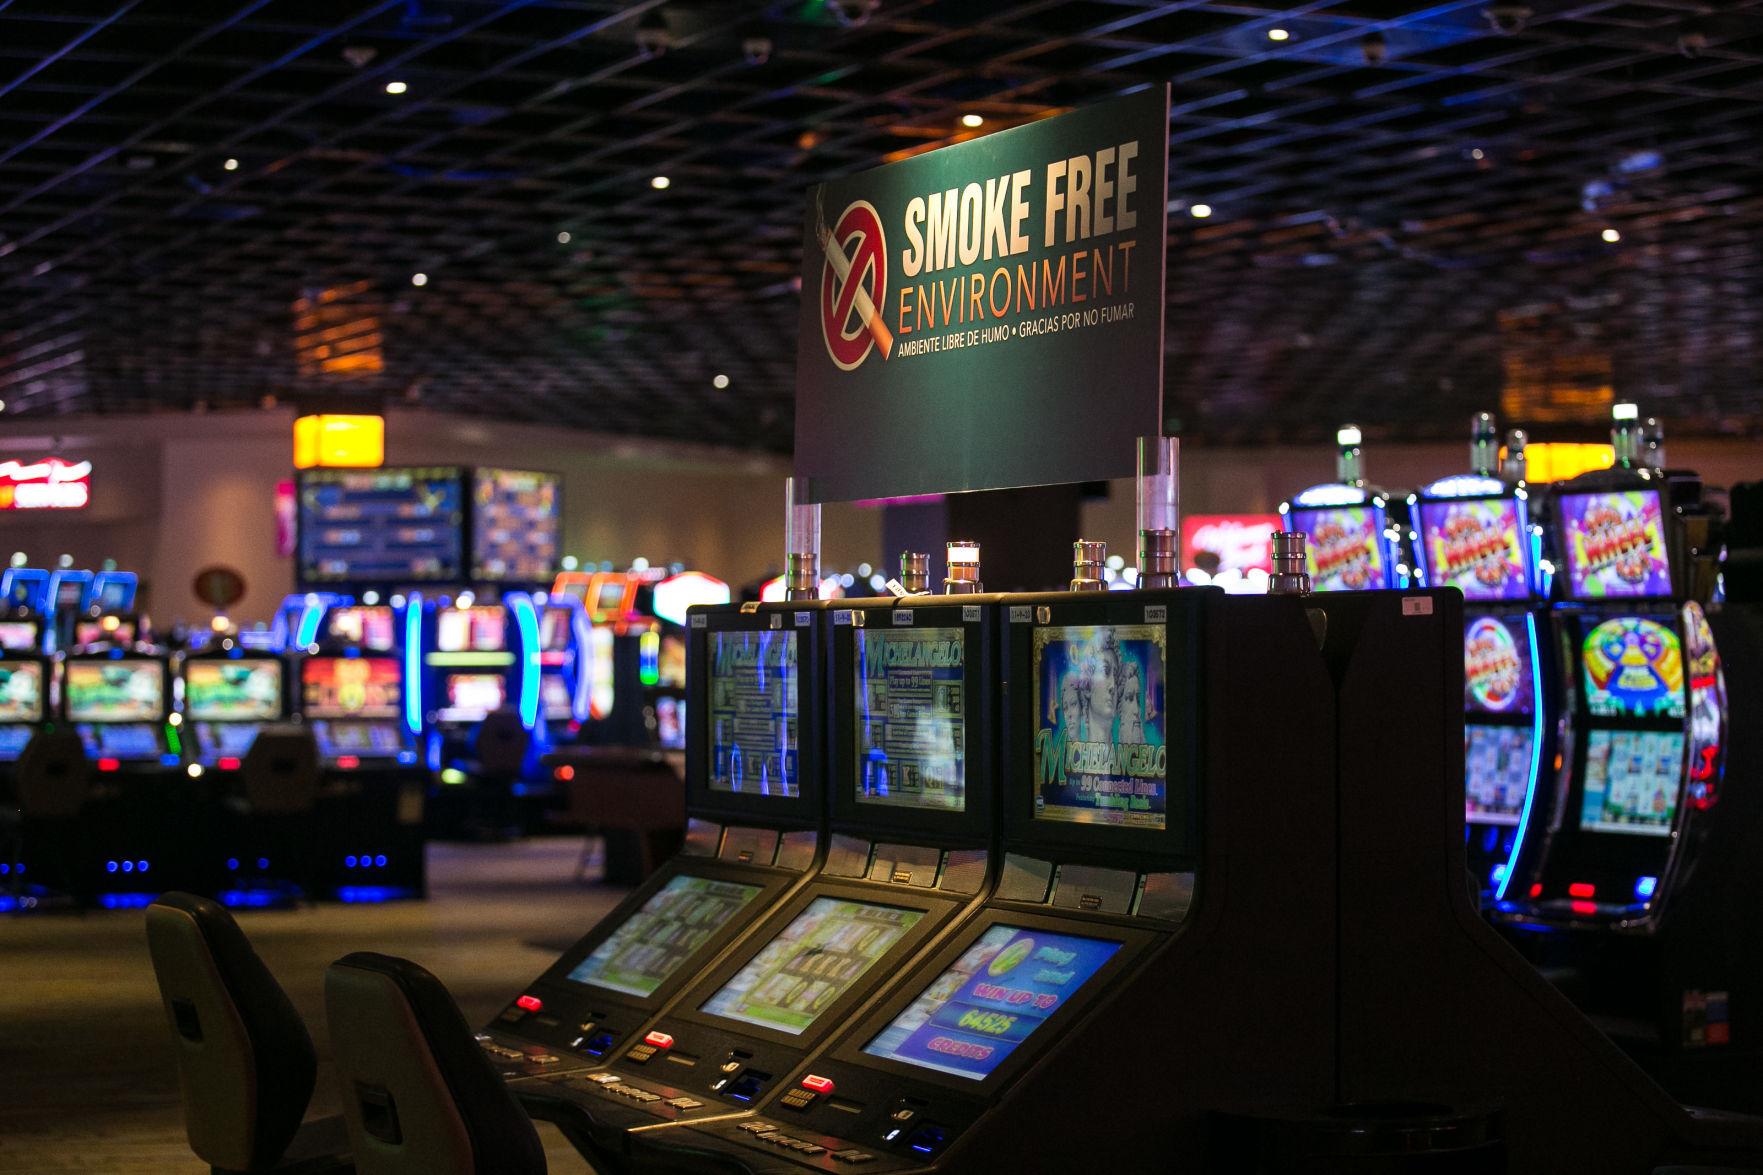 Legends Casino plans for safe reopening next week | Local | yakimaherald.com